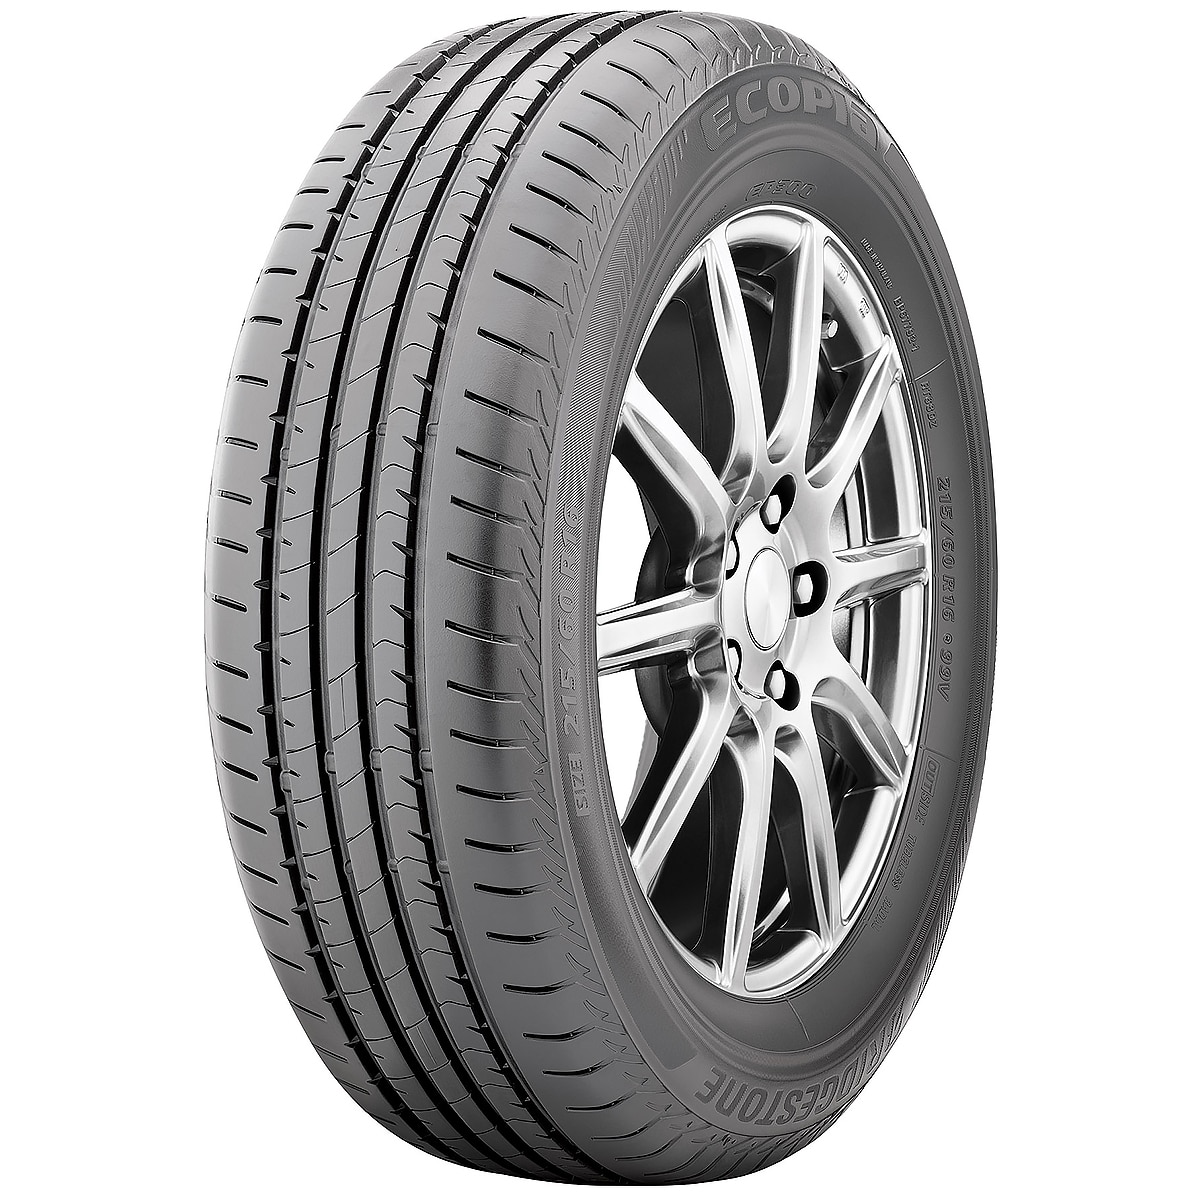 175/65R15 84H BS EP300 - Tyre